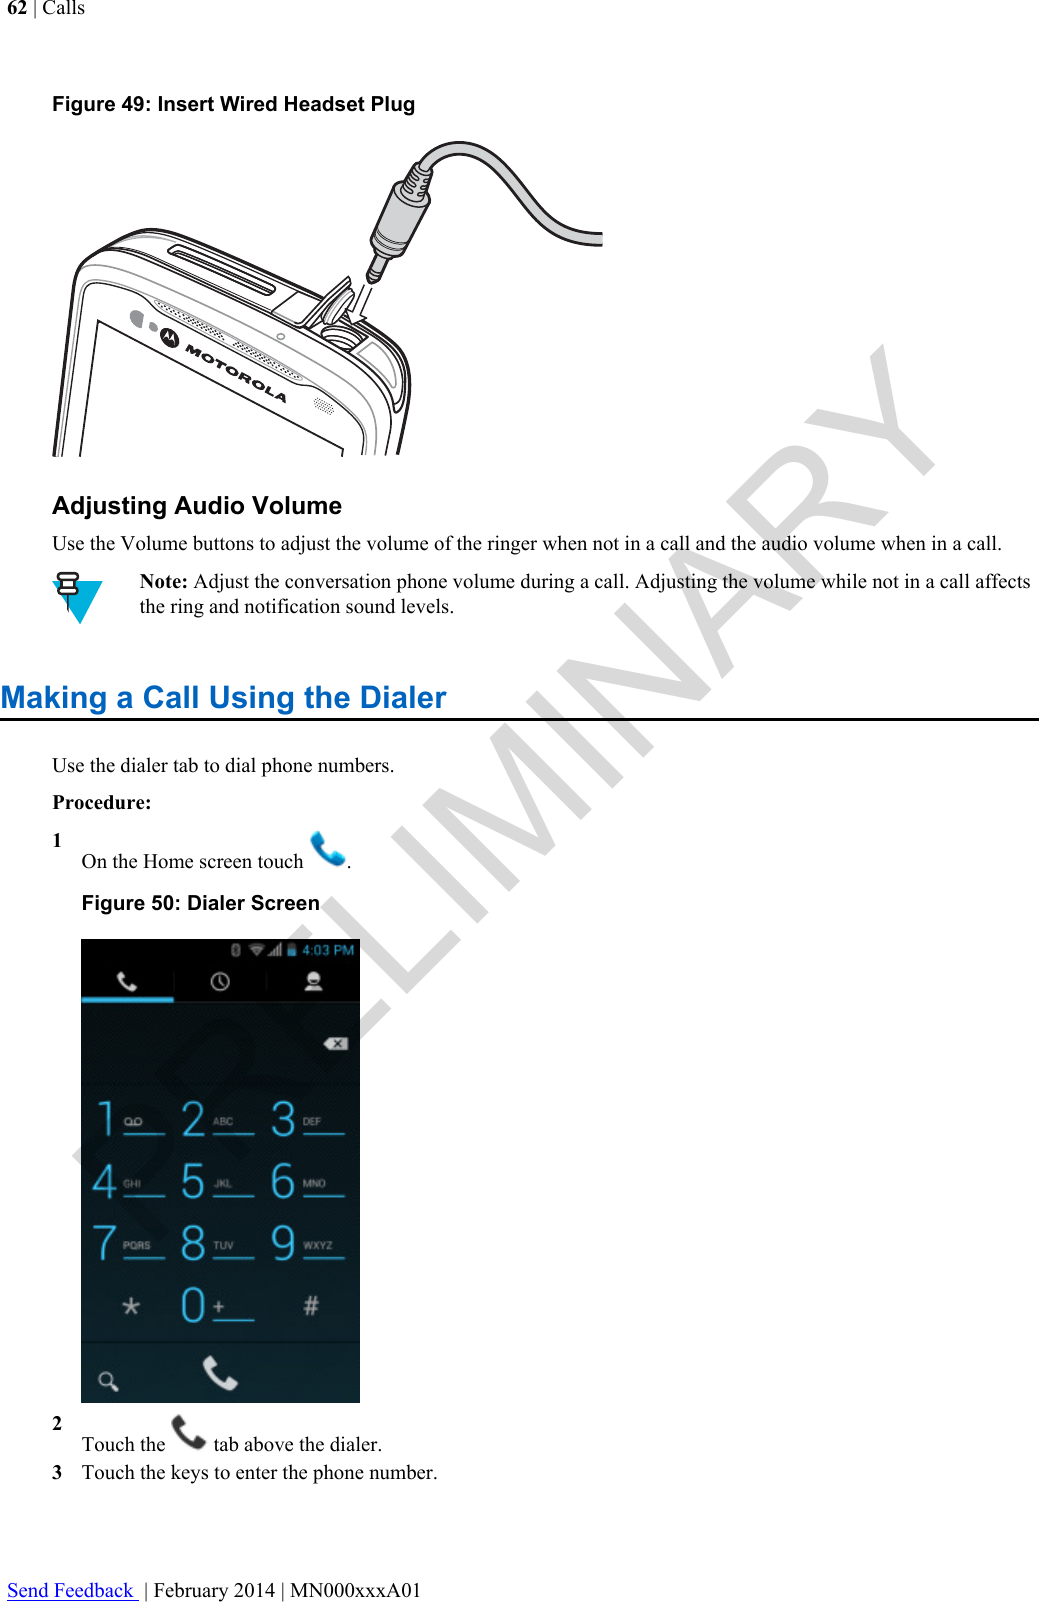 Figure 49: Insert Wired Headset PlugAdjusting Audio VolumeUse the Volume buttons to adjust the volume of the ringer when not in a call and the audio volume when in a call.Note: Adjust the conversation phone volume during a call. Adjusting the volume while not in a call affectsthe ring and notification sound levels.Making a Call Using the DialerUse the dialer tab to dial phone numbers.Procedure:1On the Home screen touch  .Figure 50: Dialer Screen2Touch the   tab above the dialer.3Touch the keys to enter the phone number.62 | CallsSend Feedback  | February 2014 | MN000xxxA01PRELIMINARY